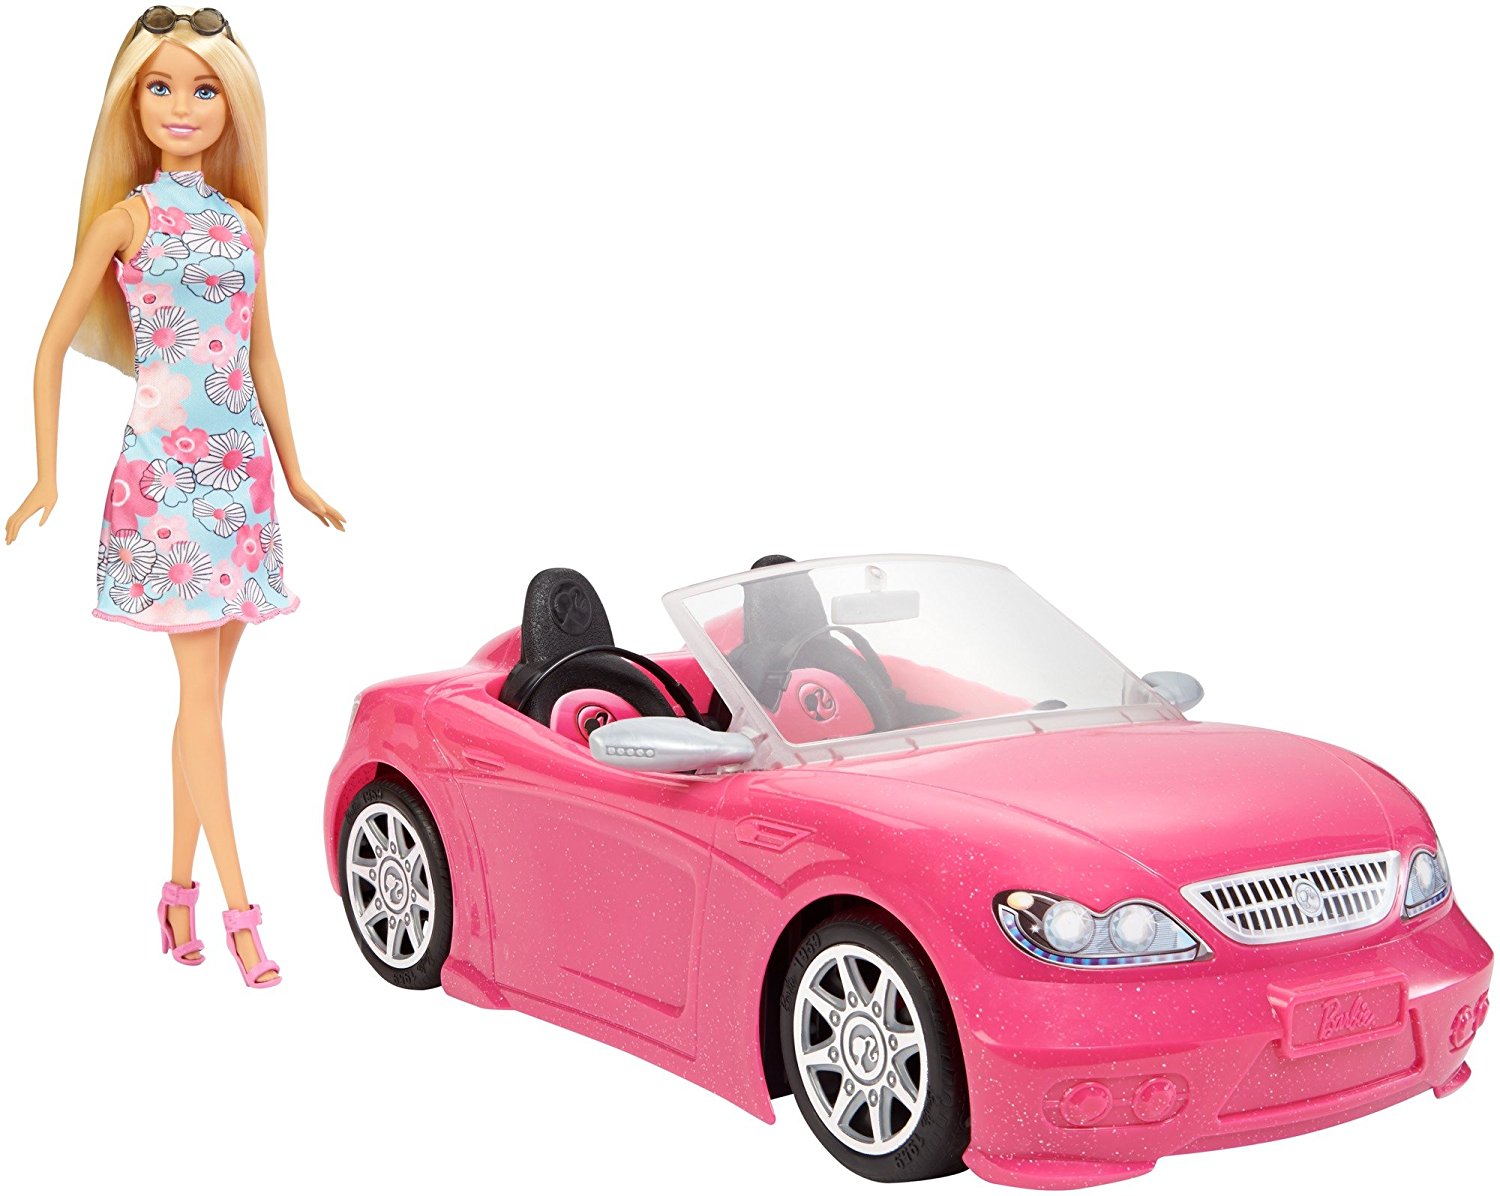 Barbie Doll And Convertible Car New